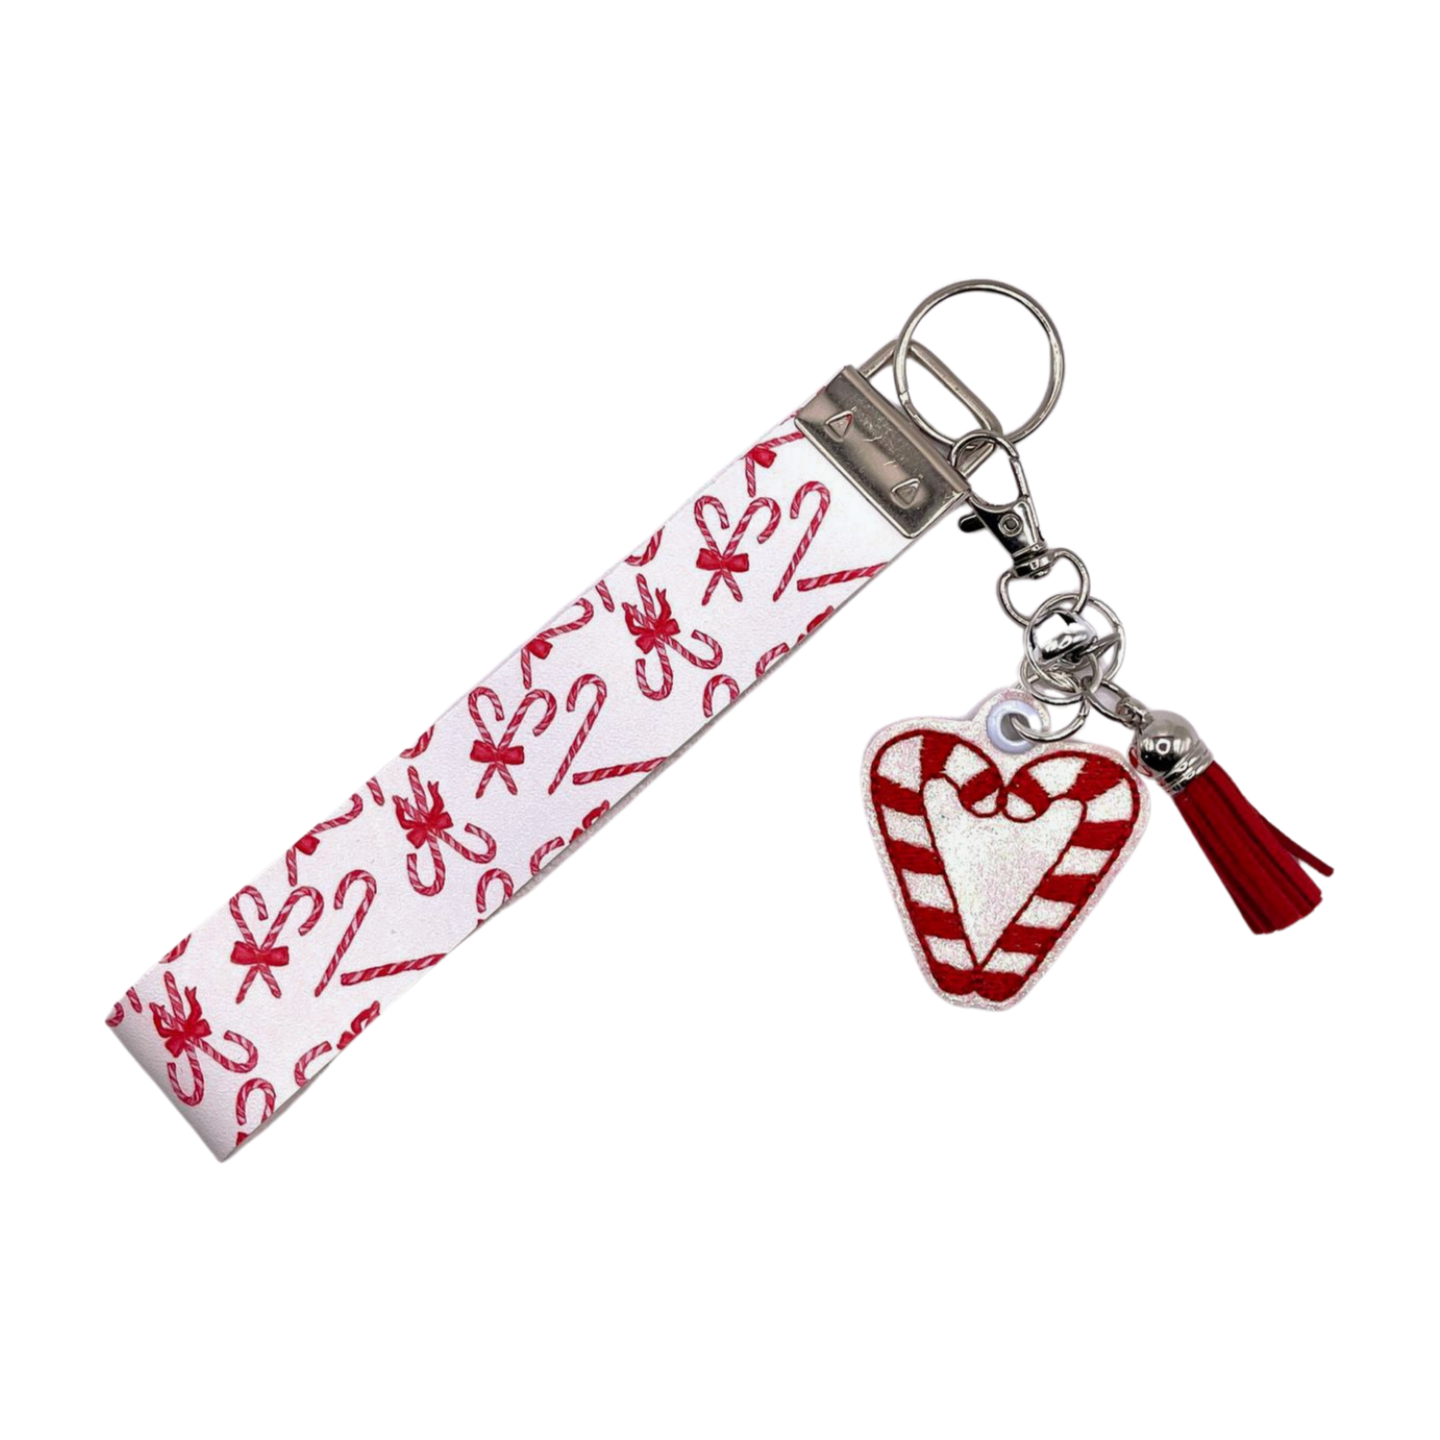 Candy Cane Heart Keychain and Wristlet